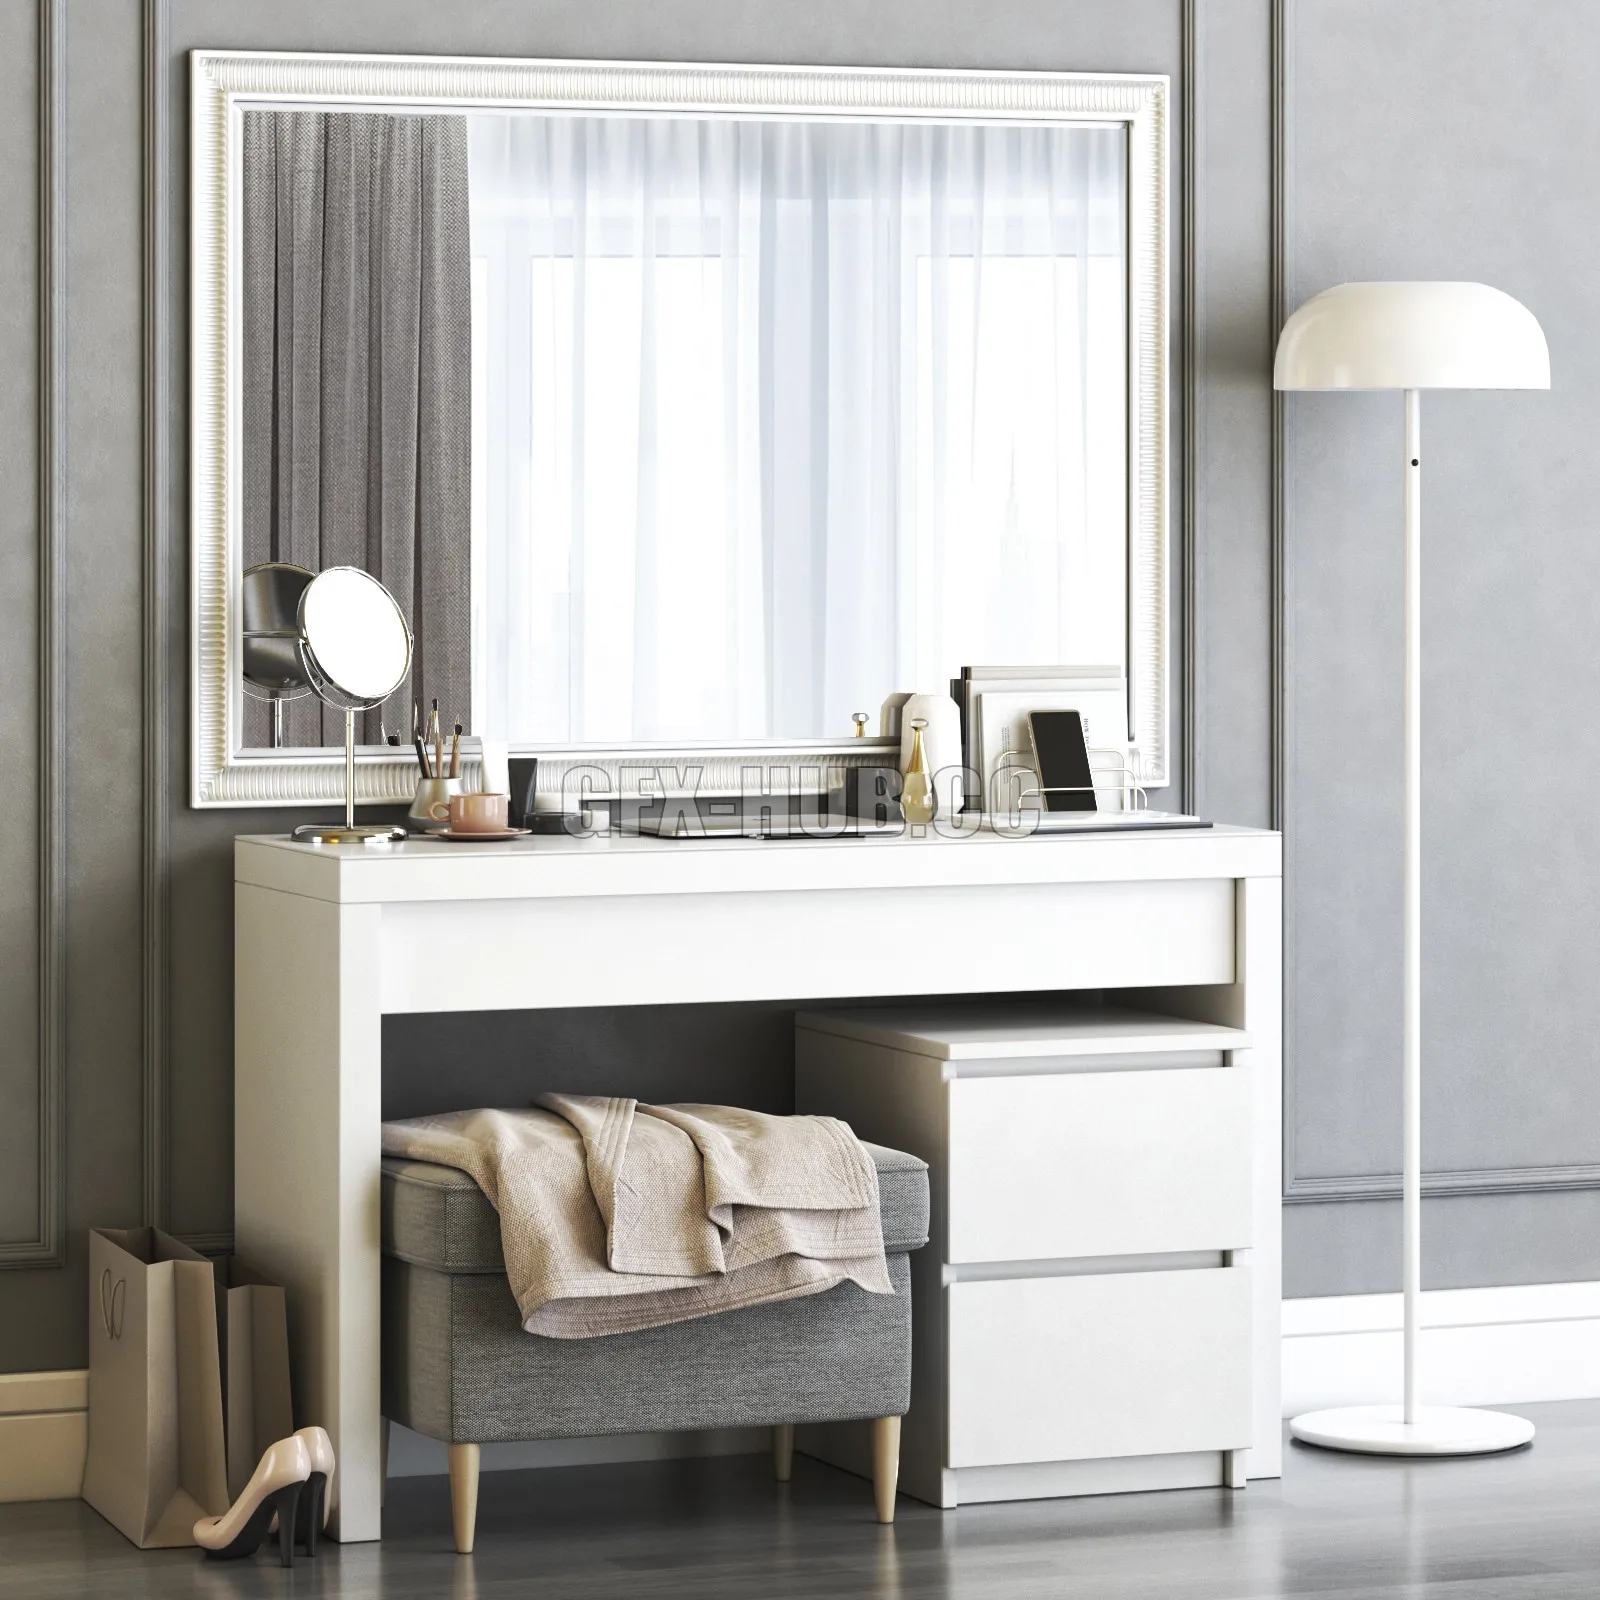 FURNITURE 3D MODELS – MALM Dressing Table by IKEA and decor